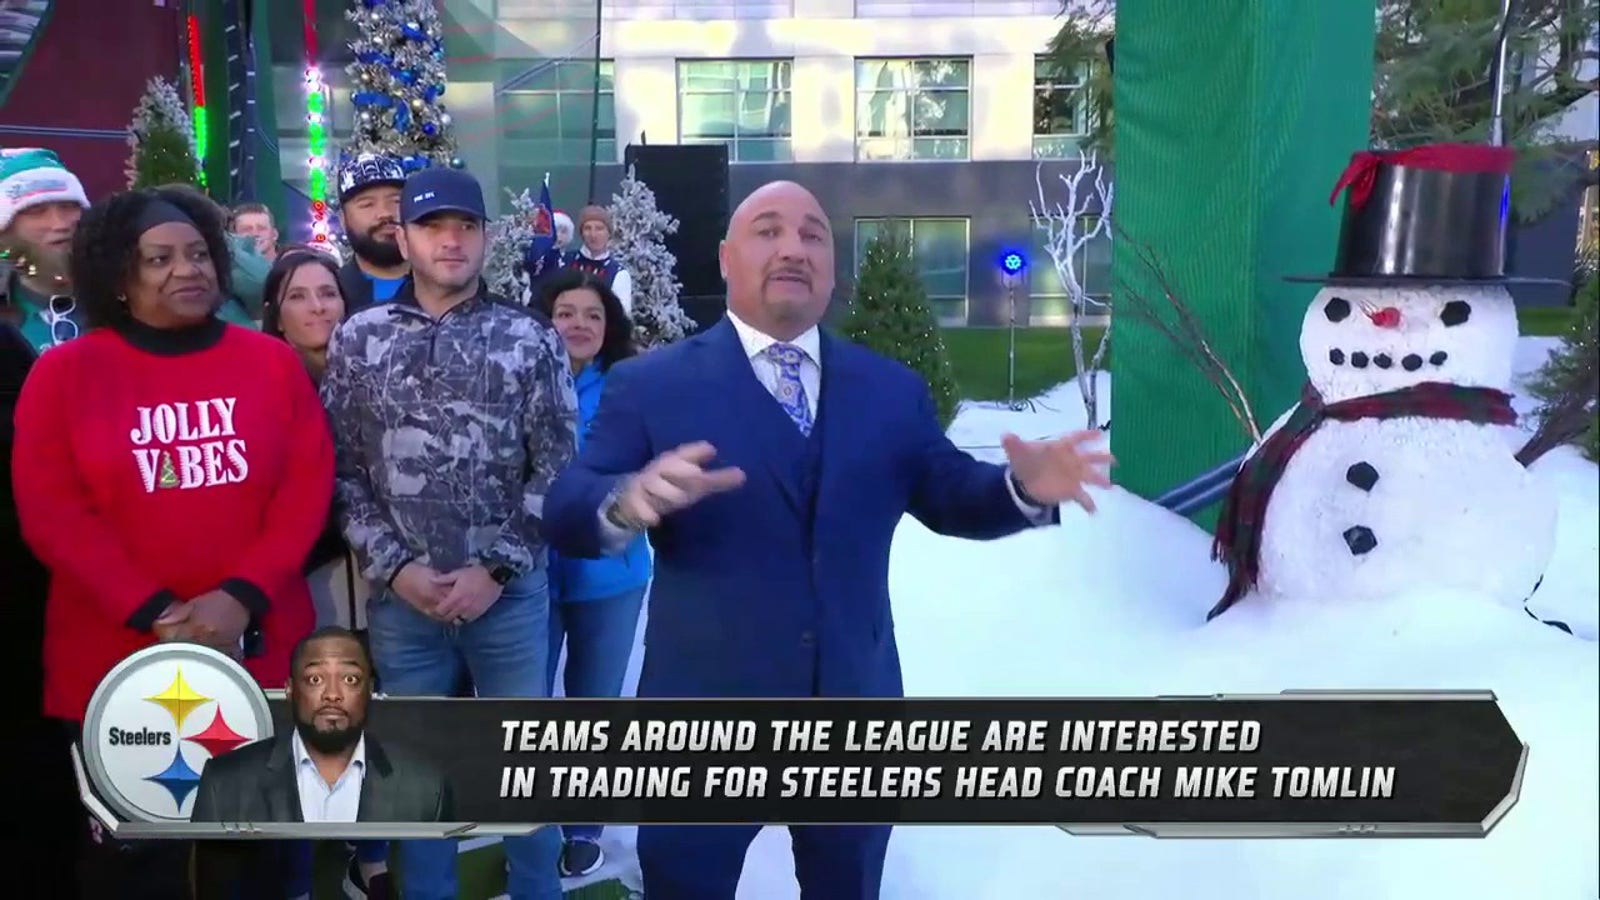 Could Mike Tomlin leave Steelers? Jay Glazer on NFL coaching carousel 